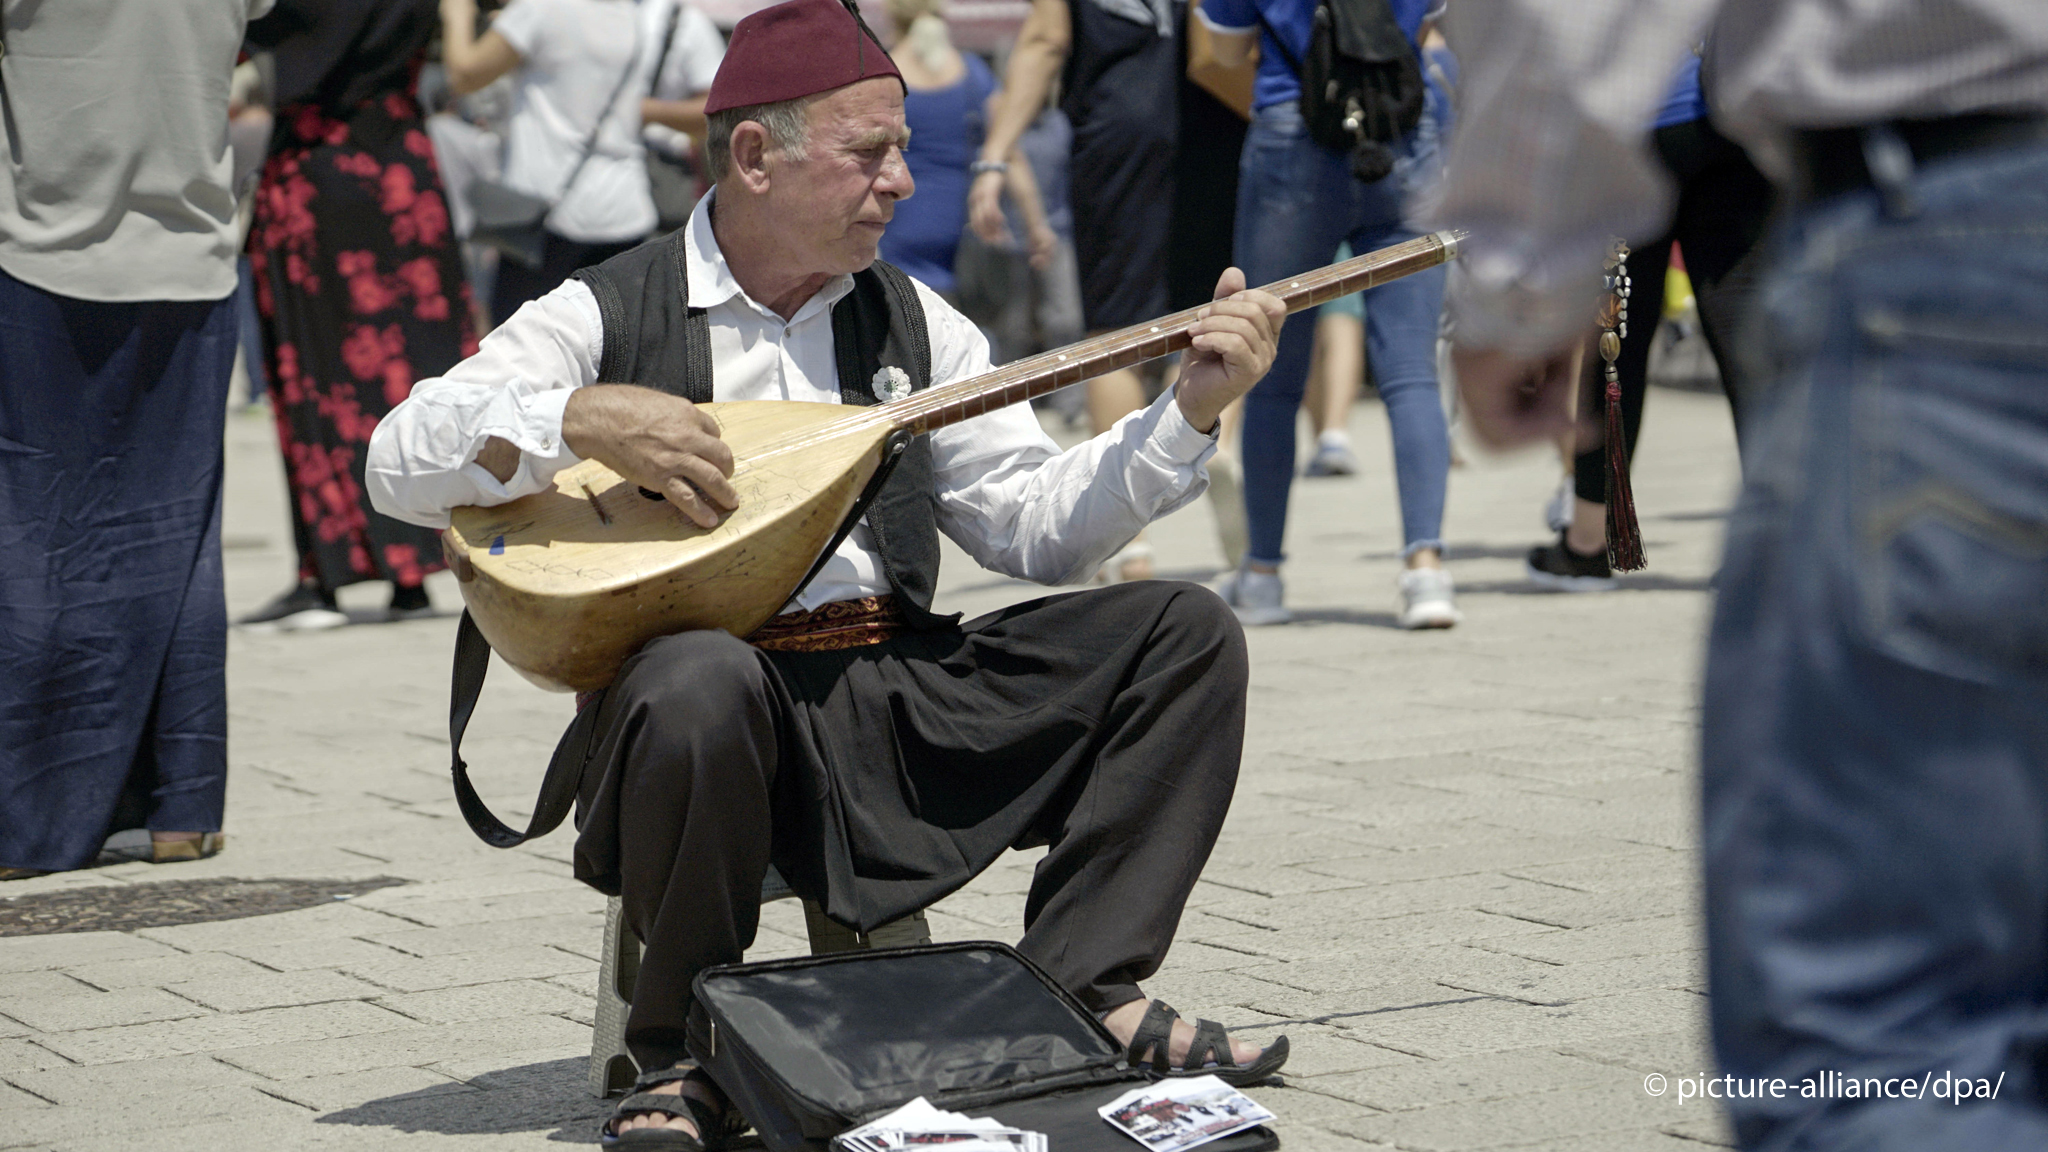 A man plays the baglama in the middle of a crowd in the sunshine (photo: picture alliance/dpa)